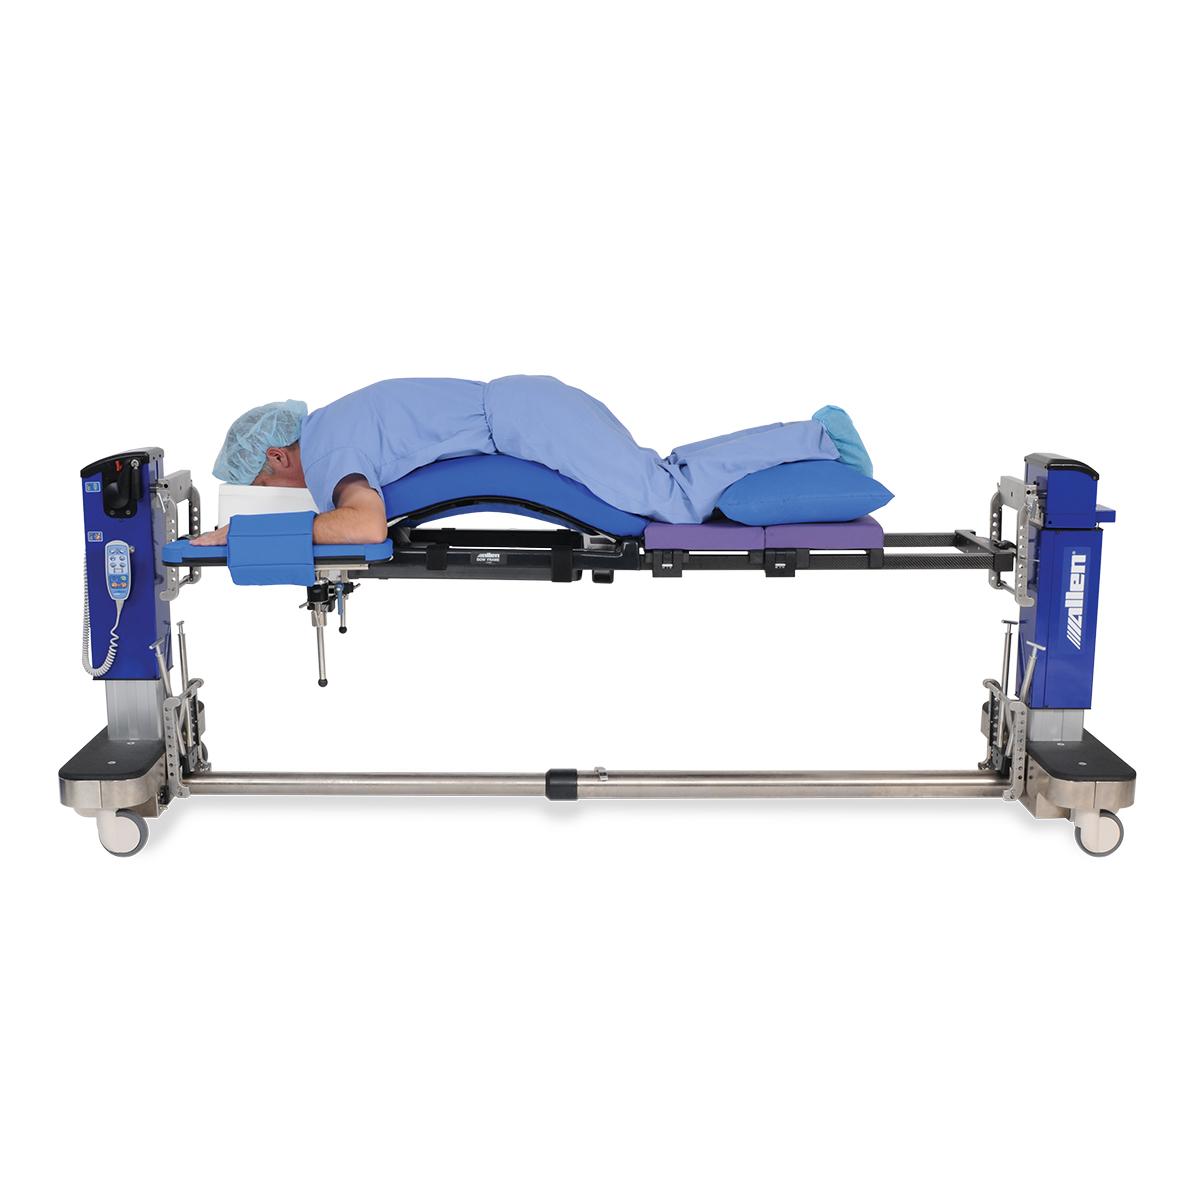 Allen Bow Frame in use, patient prone